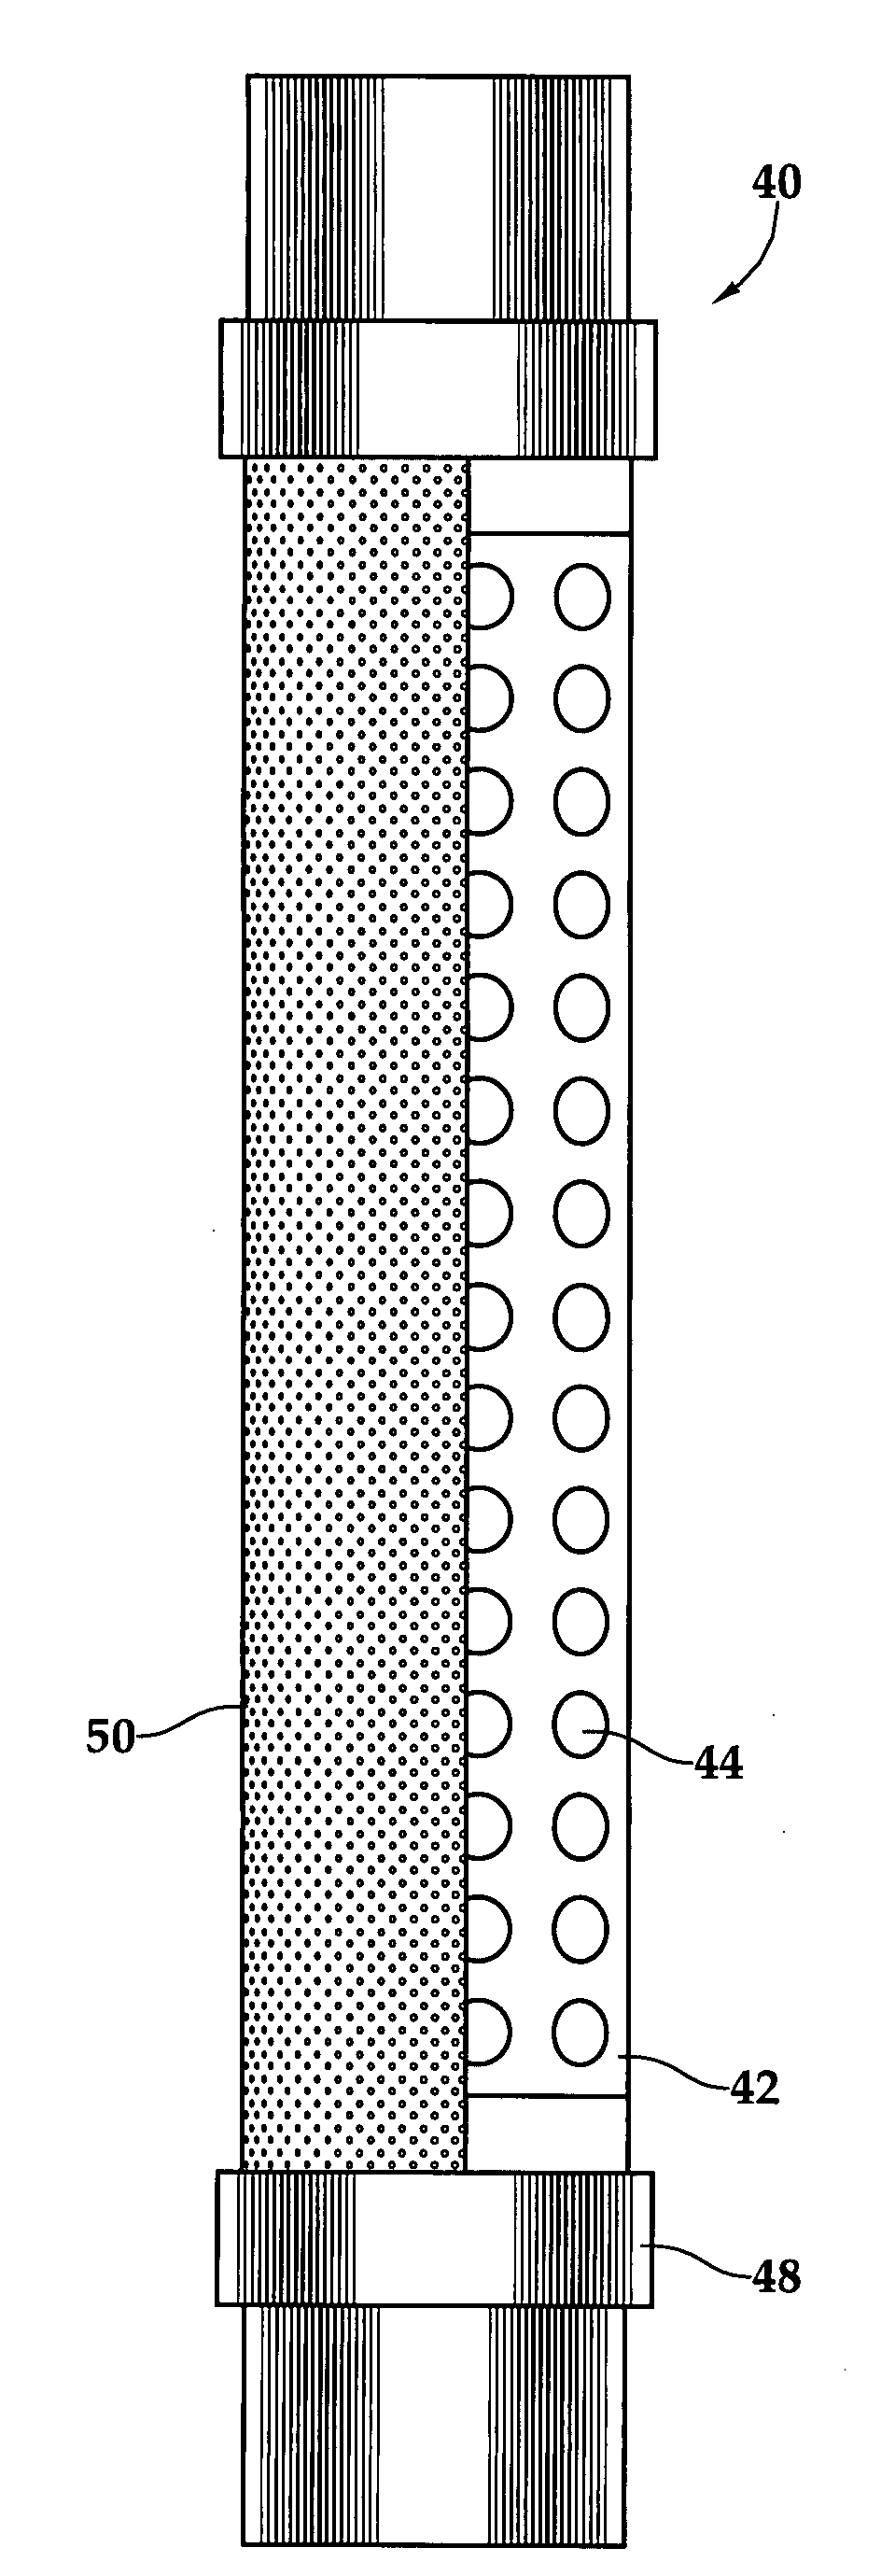 Sand control screen having a micro-perforated filtration layer